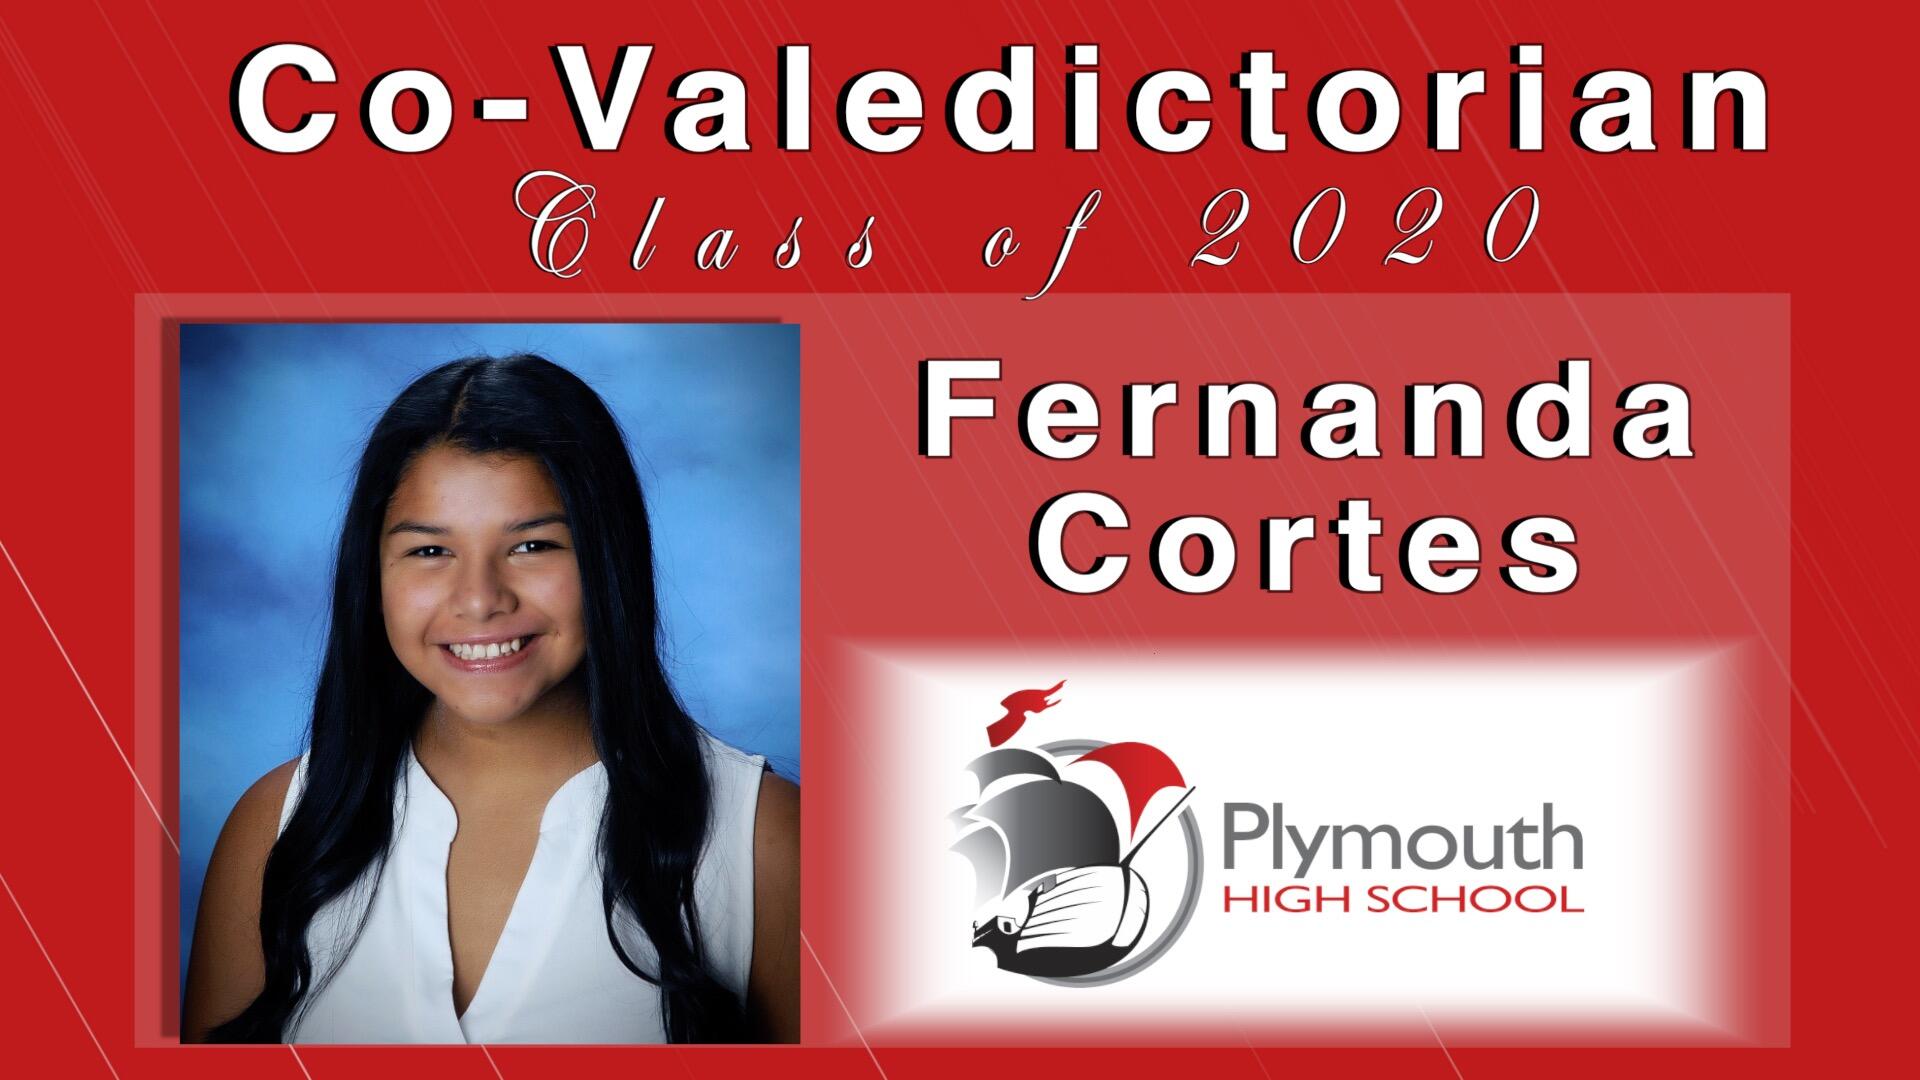 Co-Valedictorian-Class of 2020- Fernanda Cortes (photo) -Plymouth High School (logo) on red background